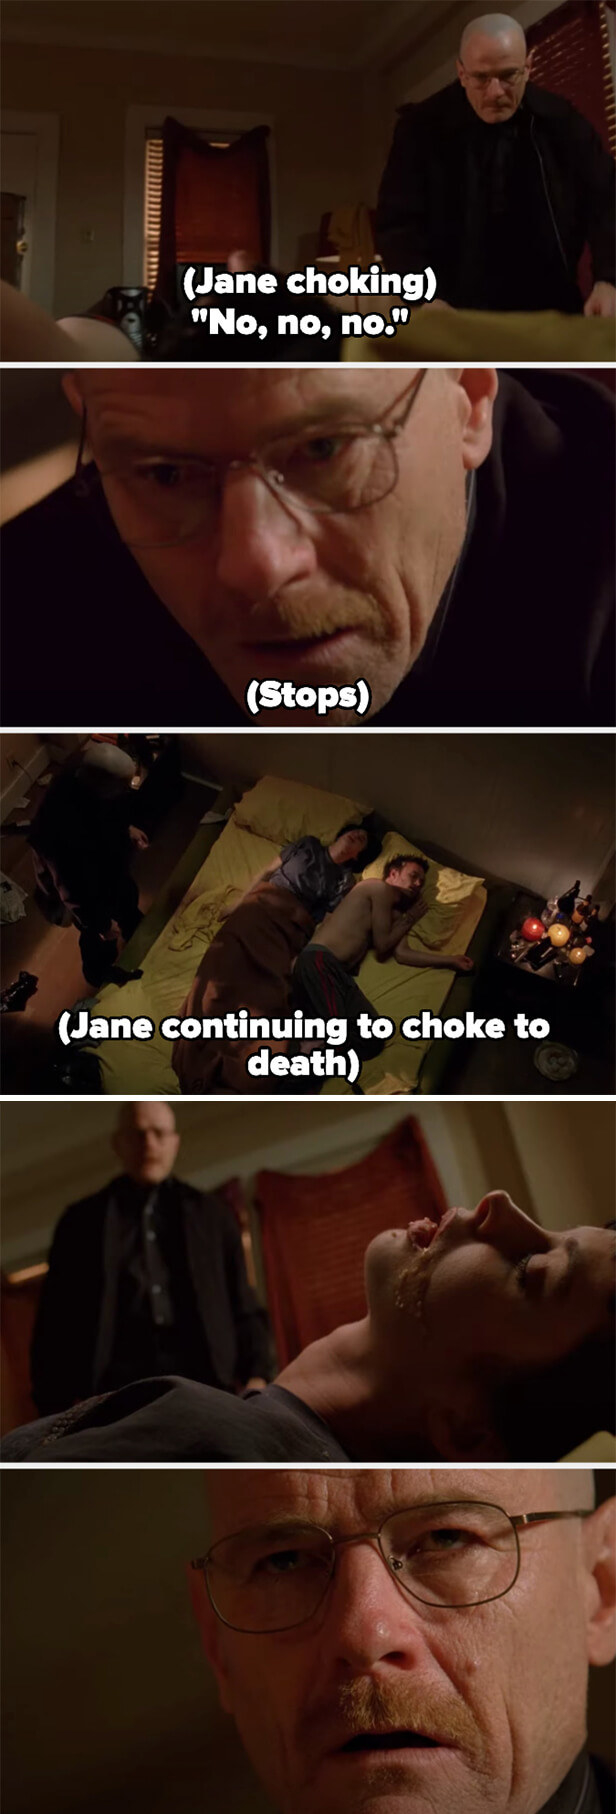 Walt rushes over to stop Jane from choking, then stops himself and watches her die